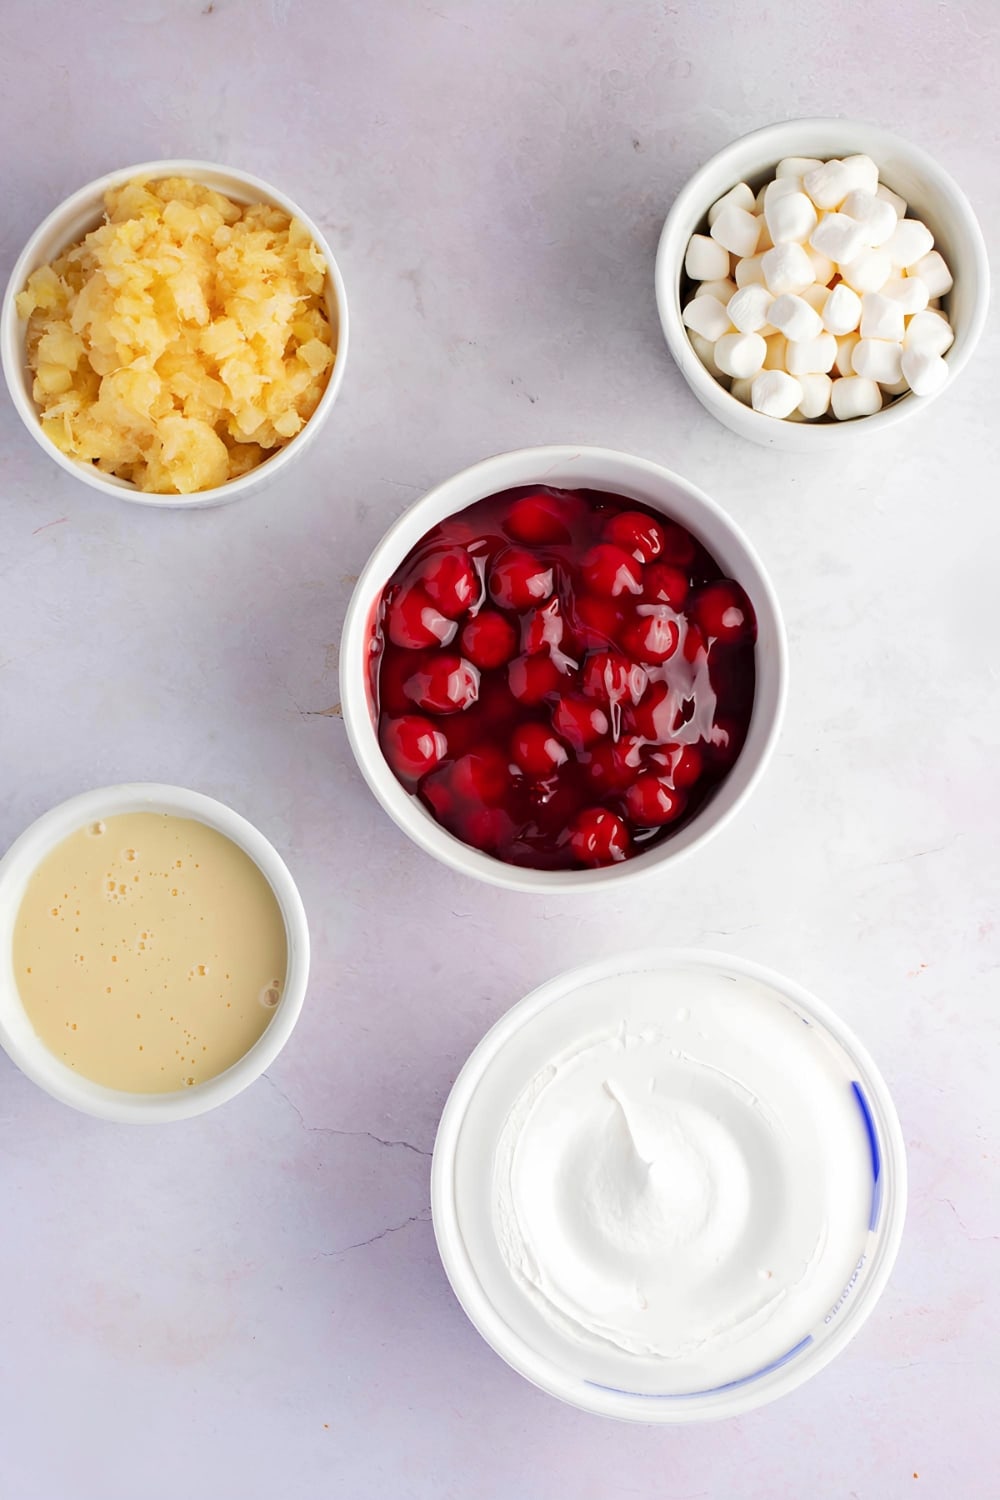 Cherry Fluff Ingredients- Bowls of Diced Pineapples, Marshmallows, Cherries, Condensed Milk, and Whip Cream